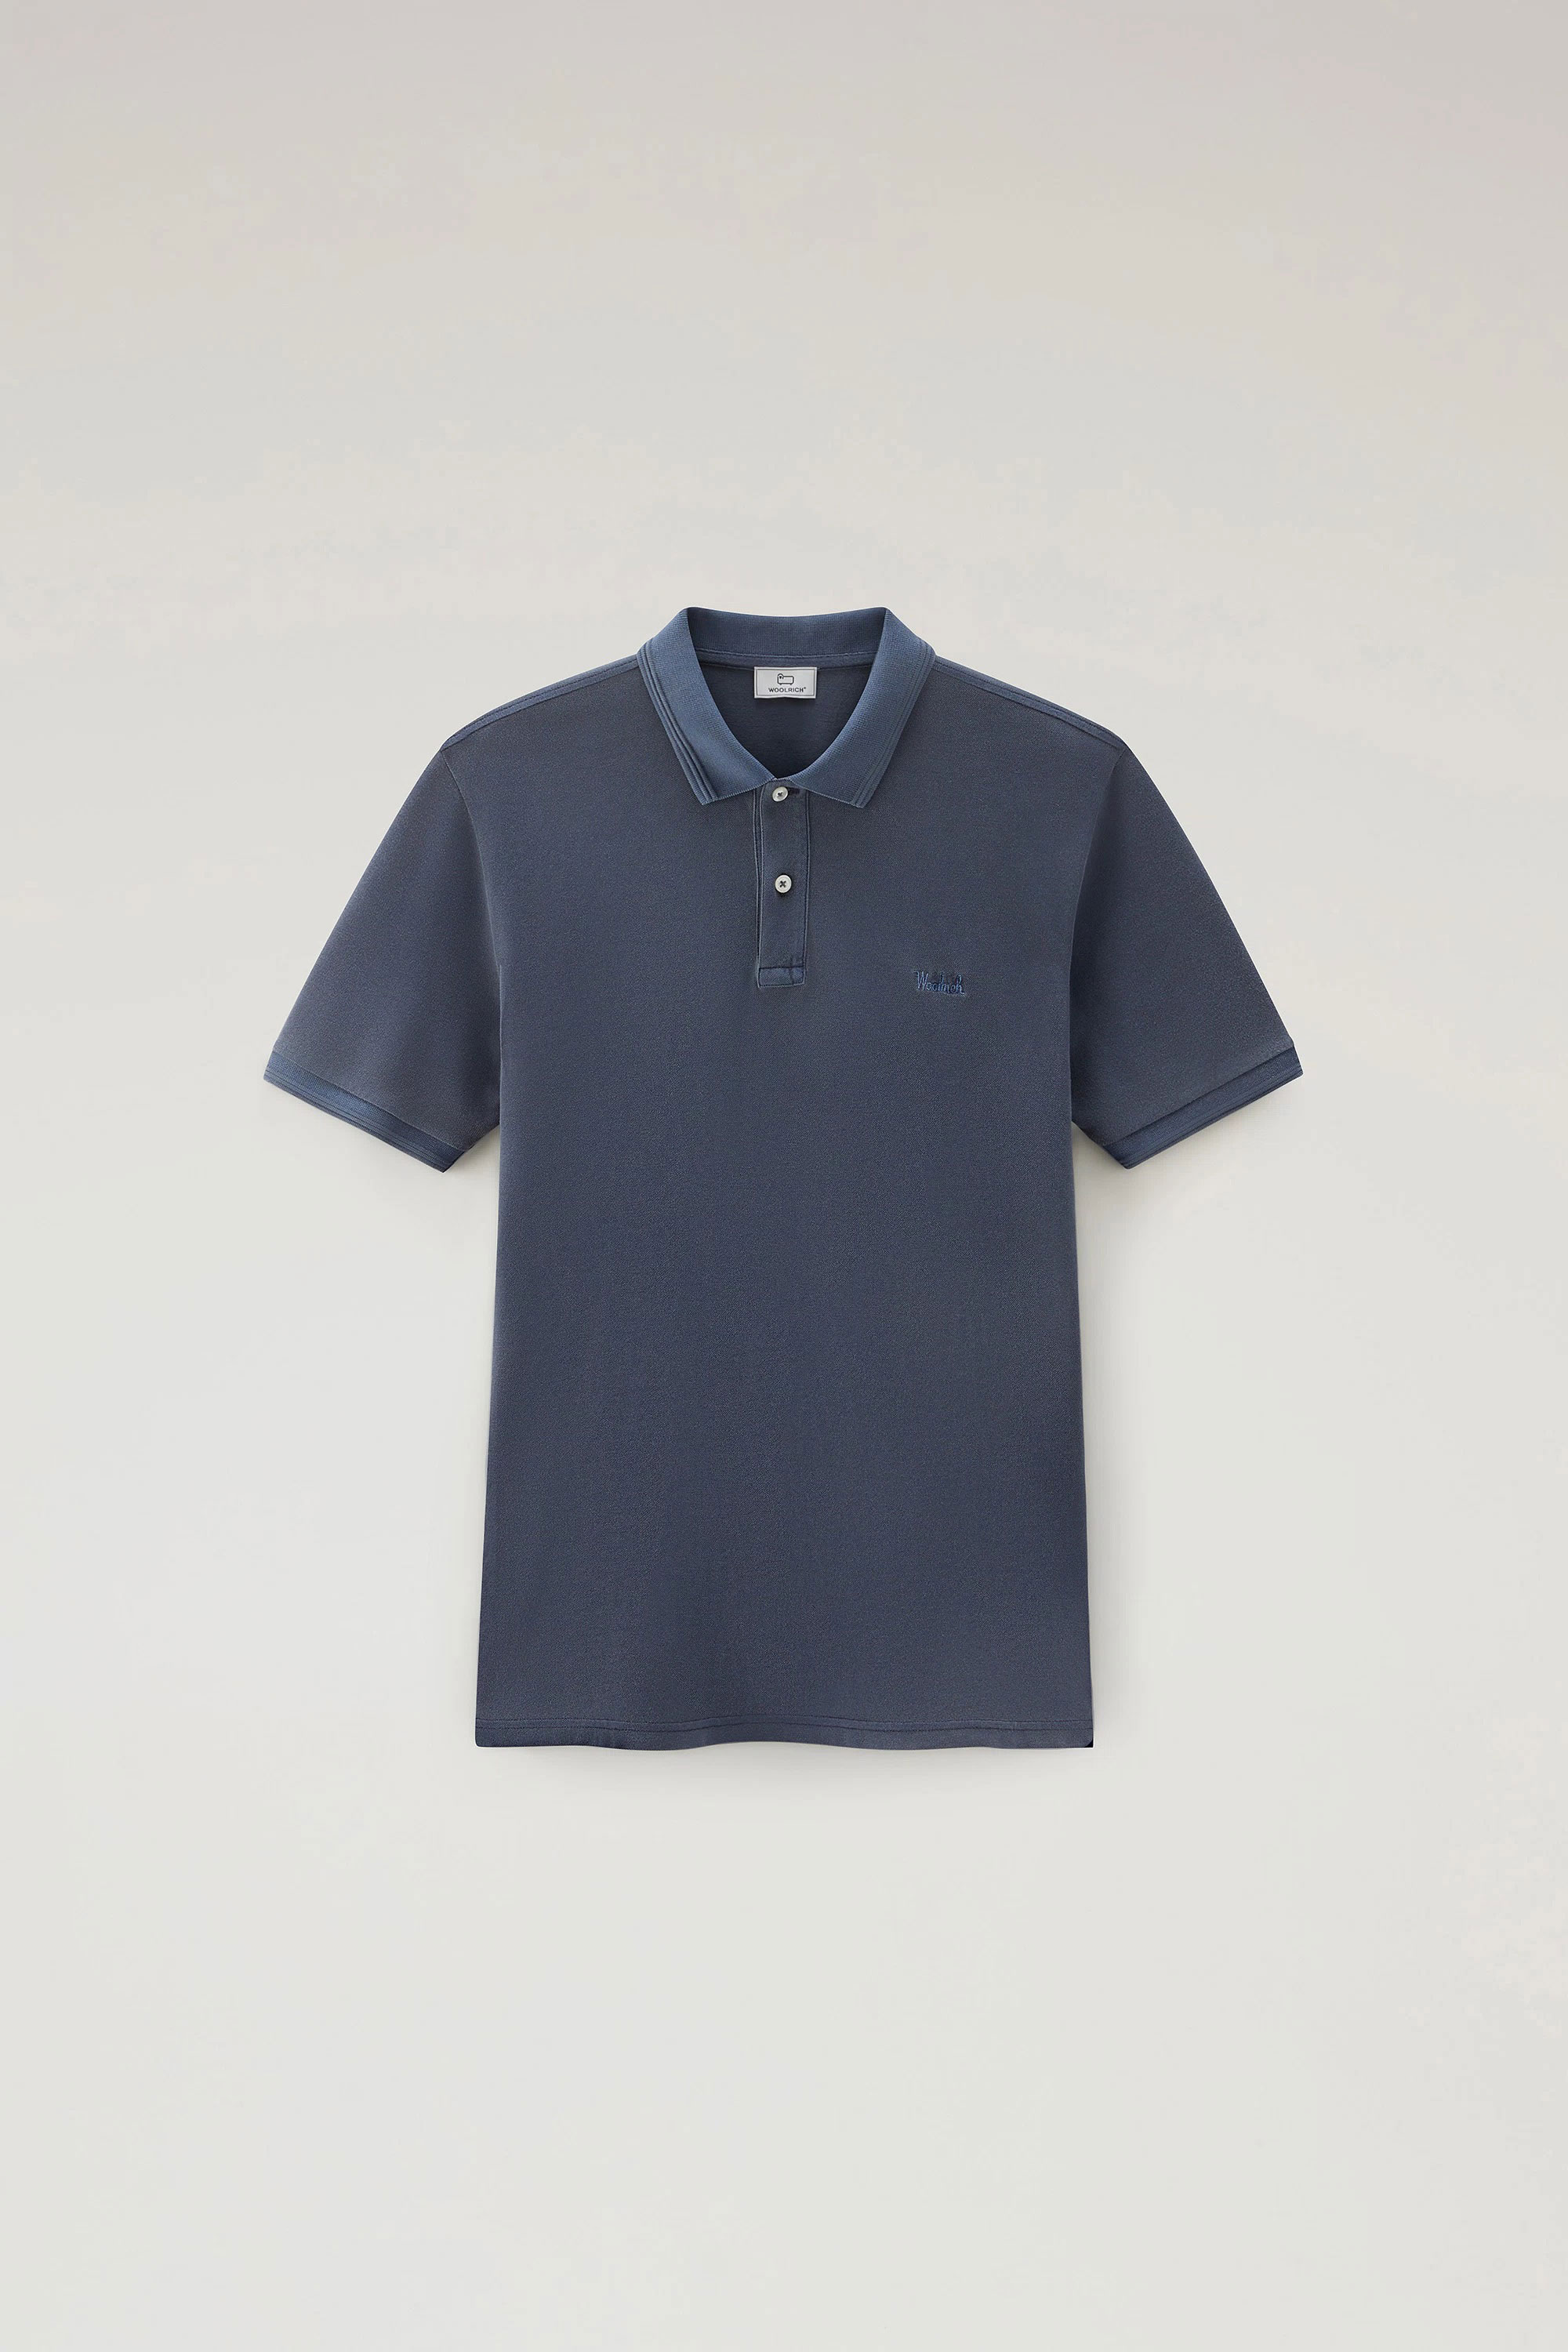 Polo Woolrich Mackinack Tinta In Capo in Pique Blu